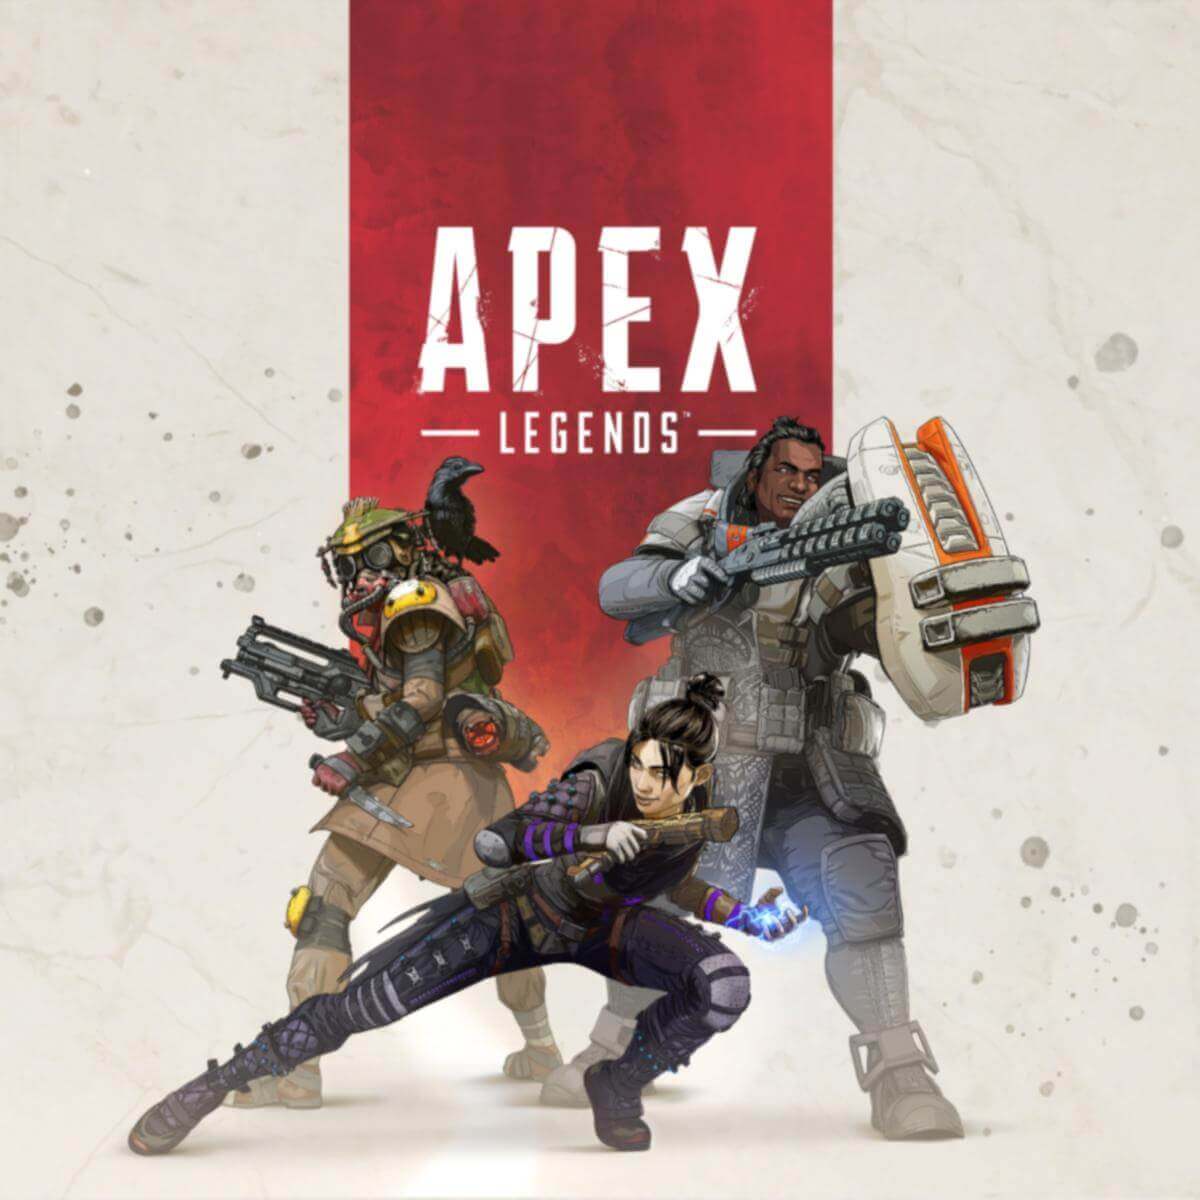 Didn't get coins after in-game purchase in Apex Legeds